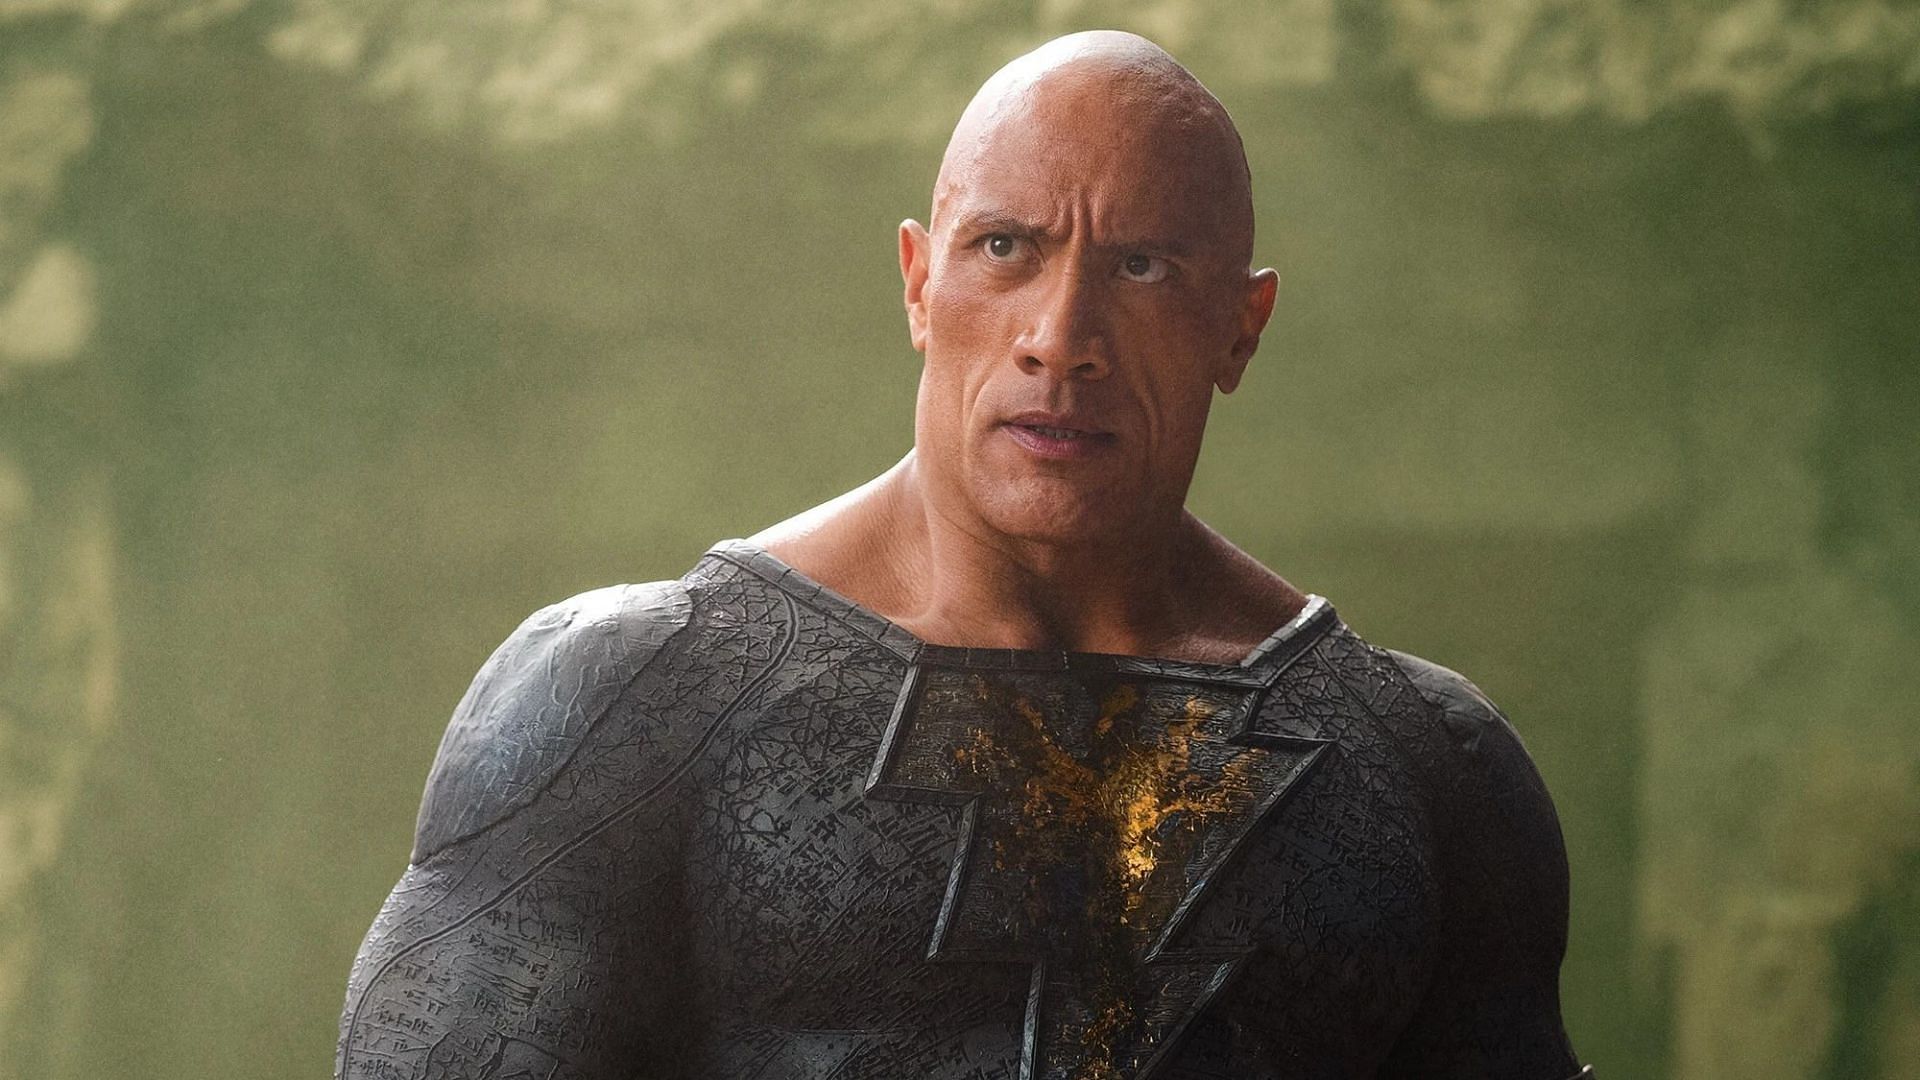 Where to watch Black Adam Online Digital release date and streaming details